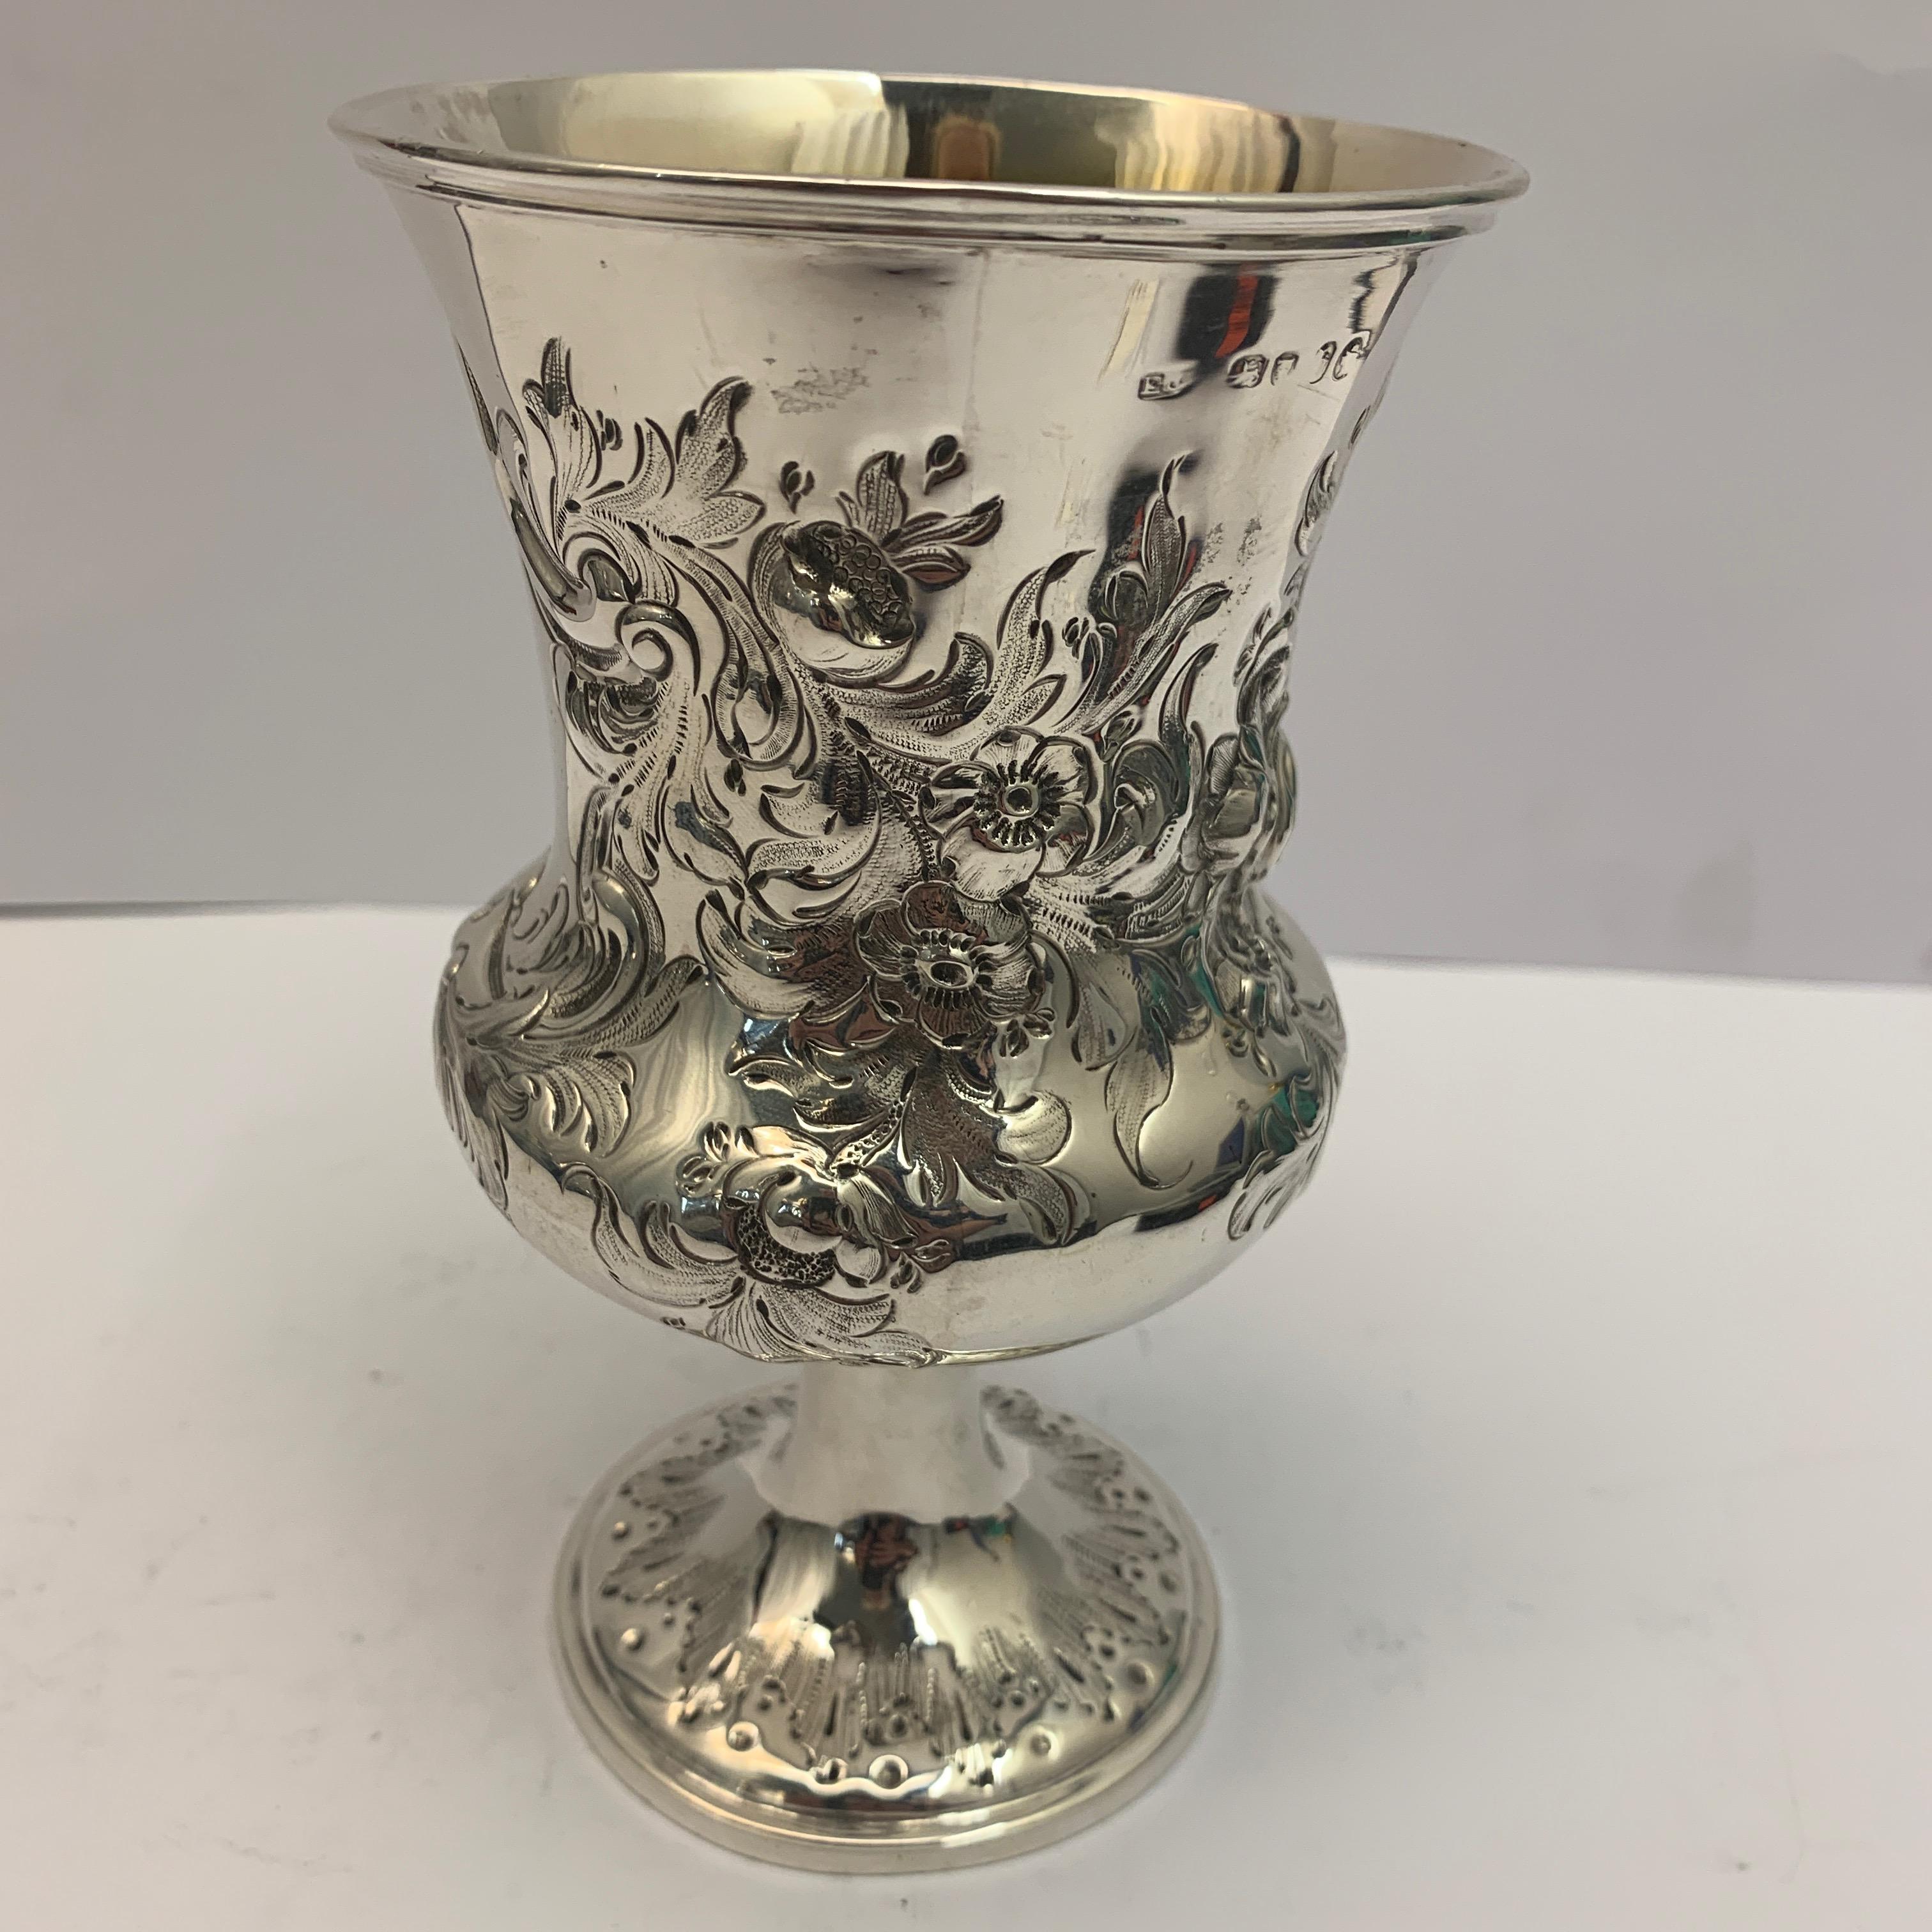 A silver goblet with gilt interior and decorated with flowers and leaves. Hallmarked for 1857.